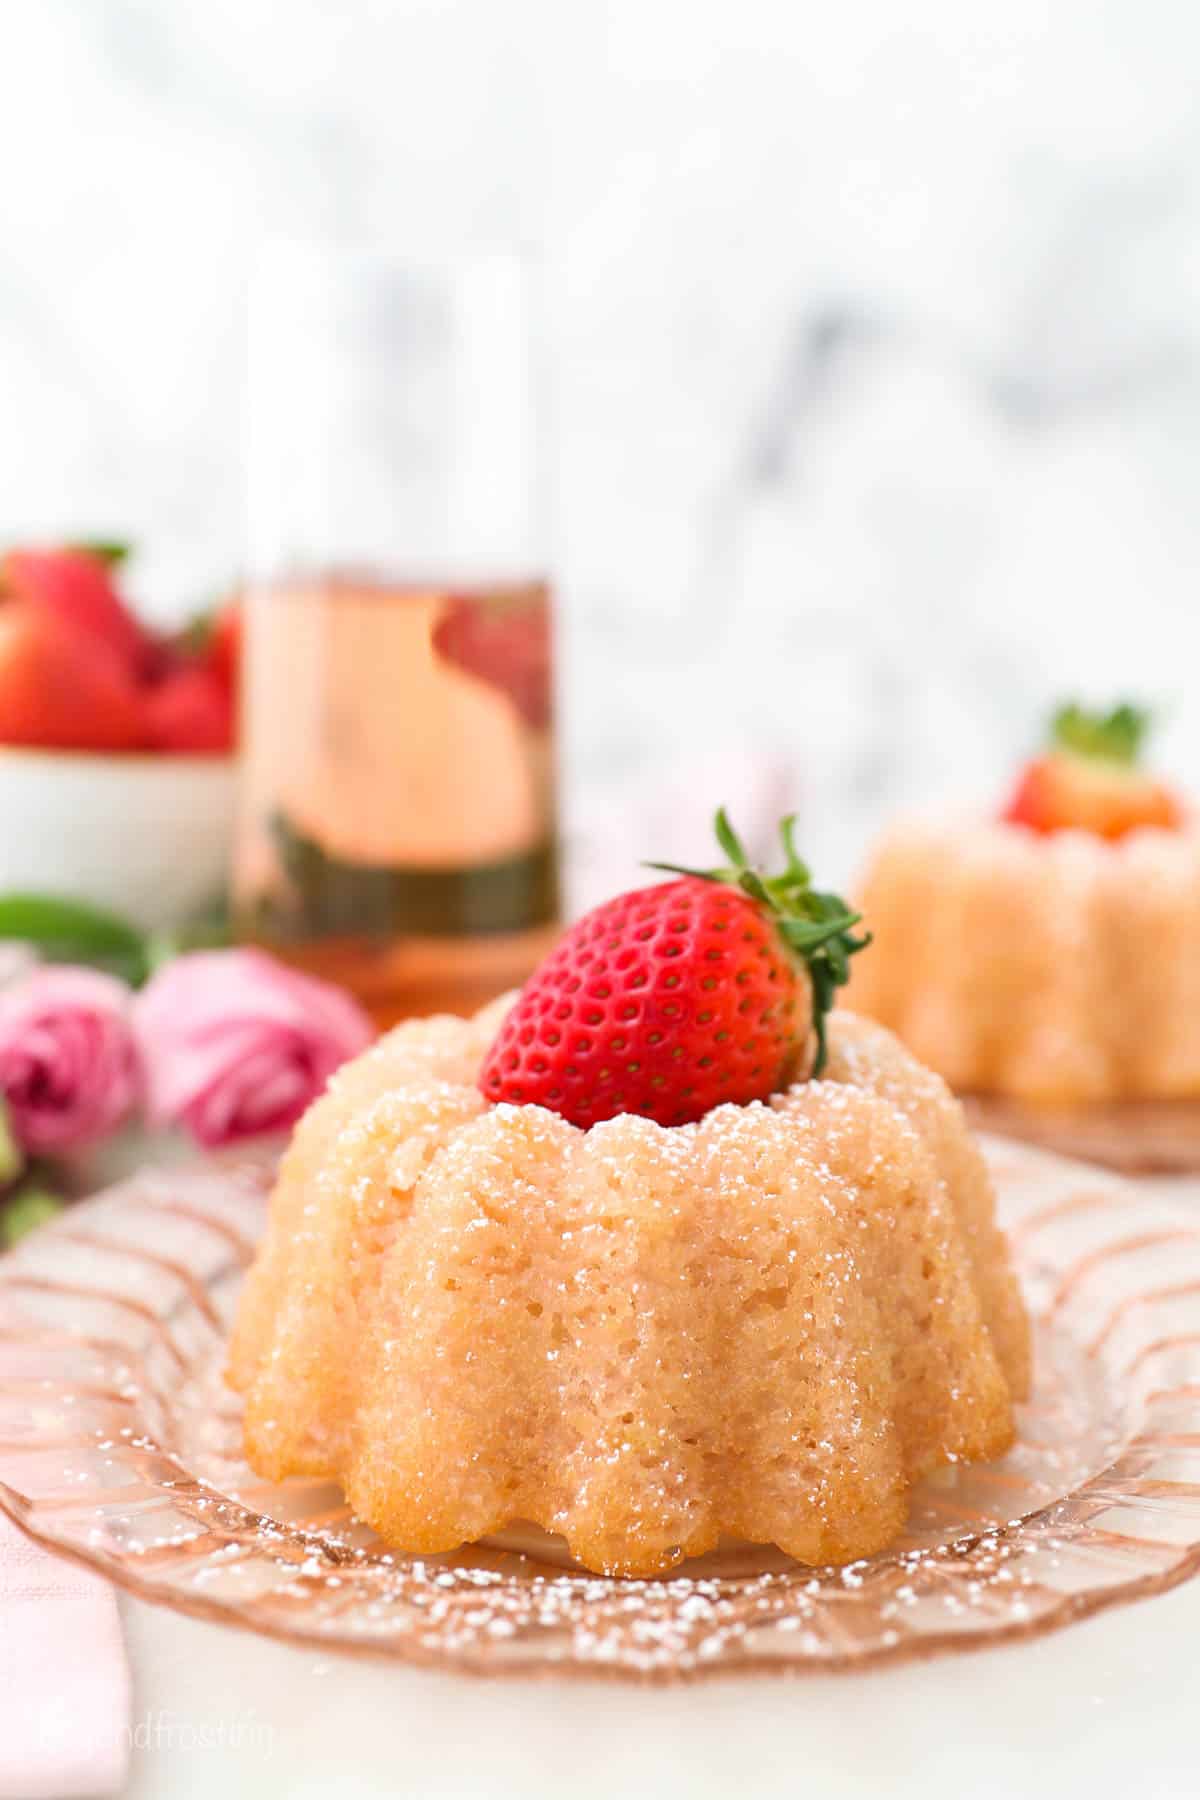 A pink glass glass with a mini bundt cake topped with a strawberry